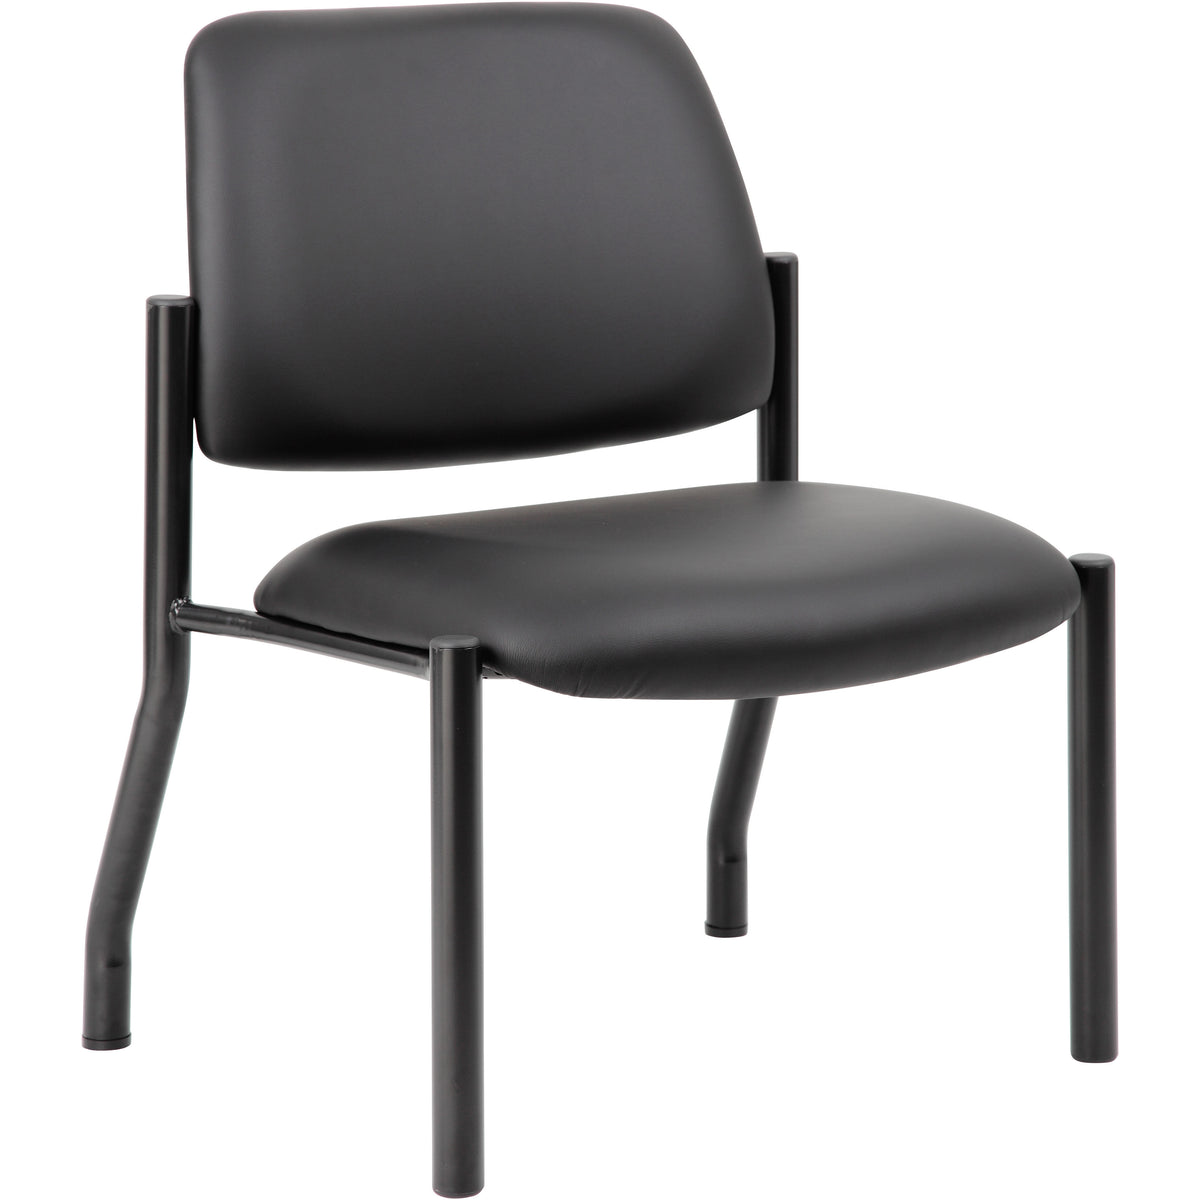 Antimicrobial Armless Guest Chair, 400 lb. weight capacity, B9595AM-BK-400